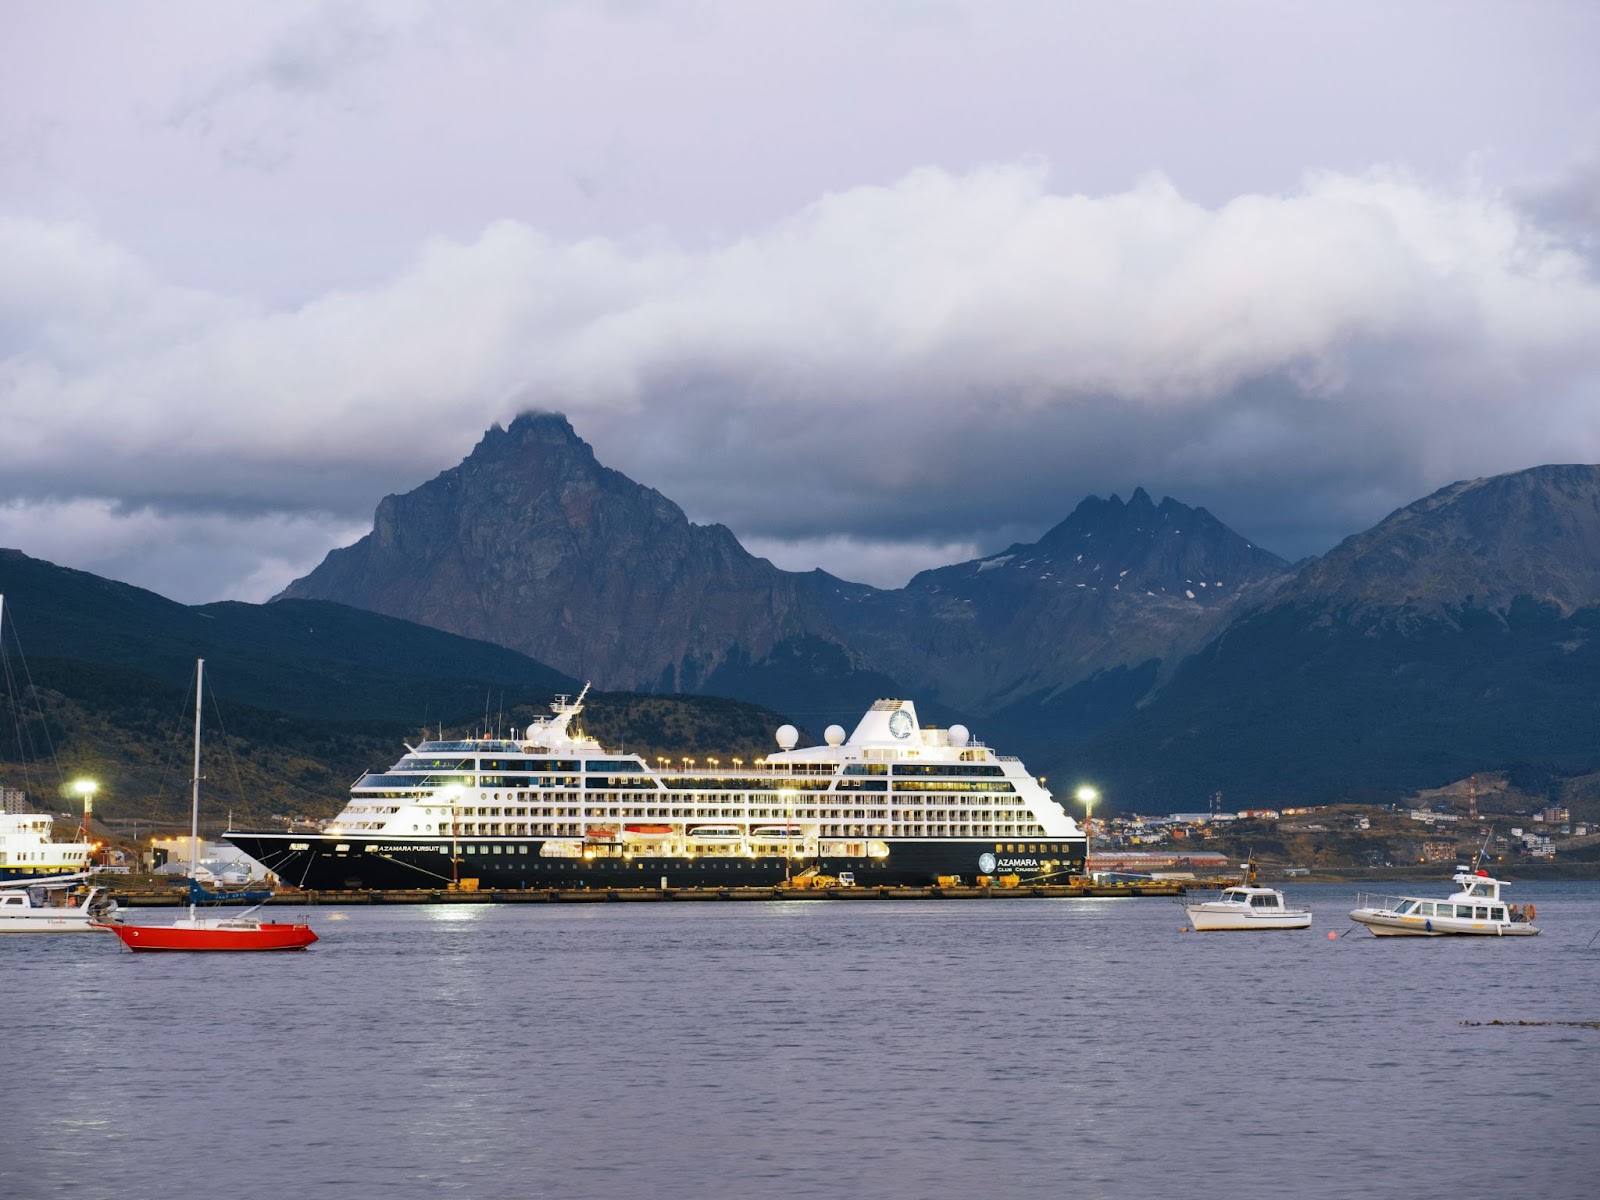 Azamara Pursuit docked in Ushuaia, Argentina, the Southernmost City in the World